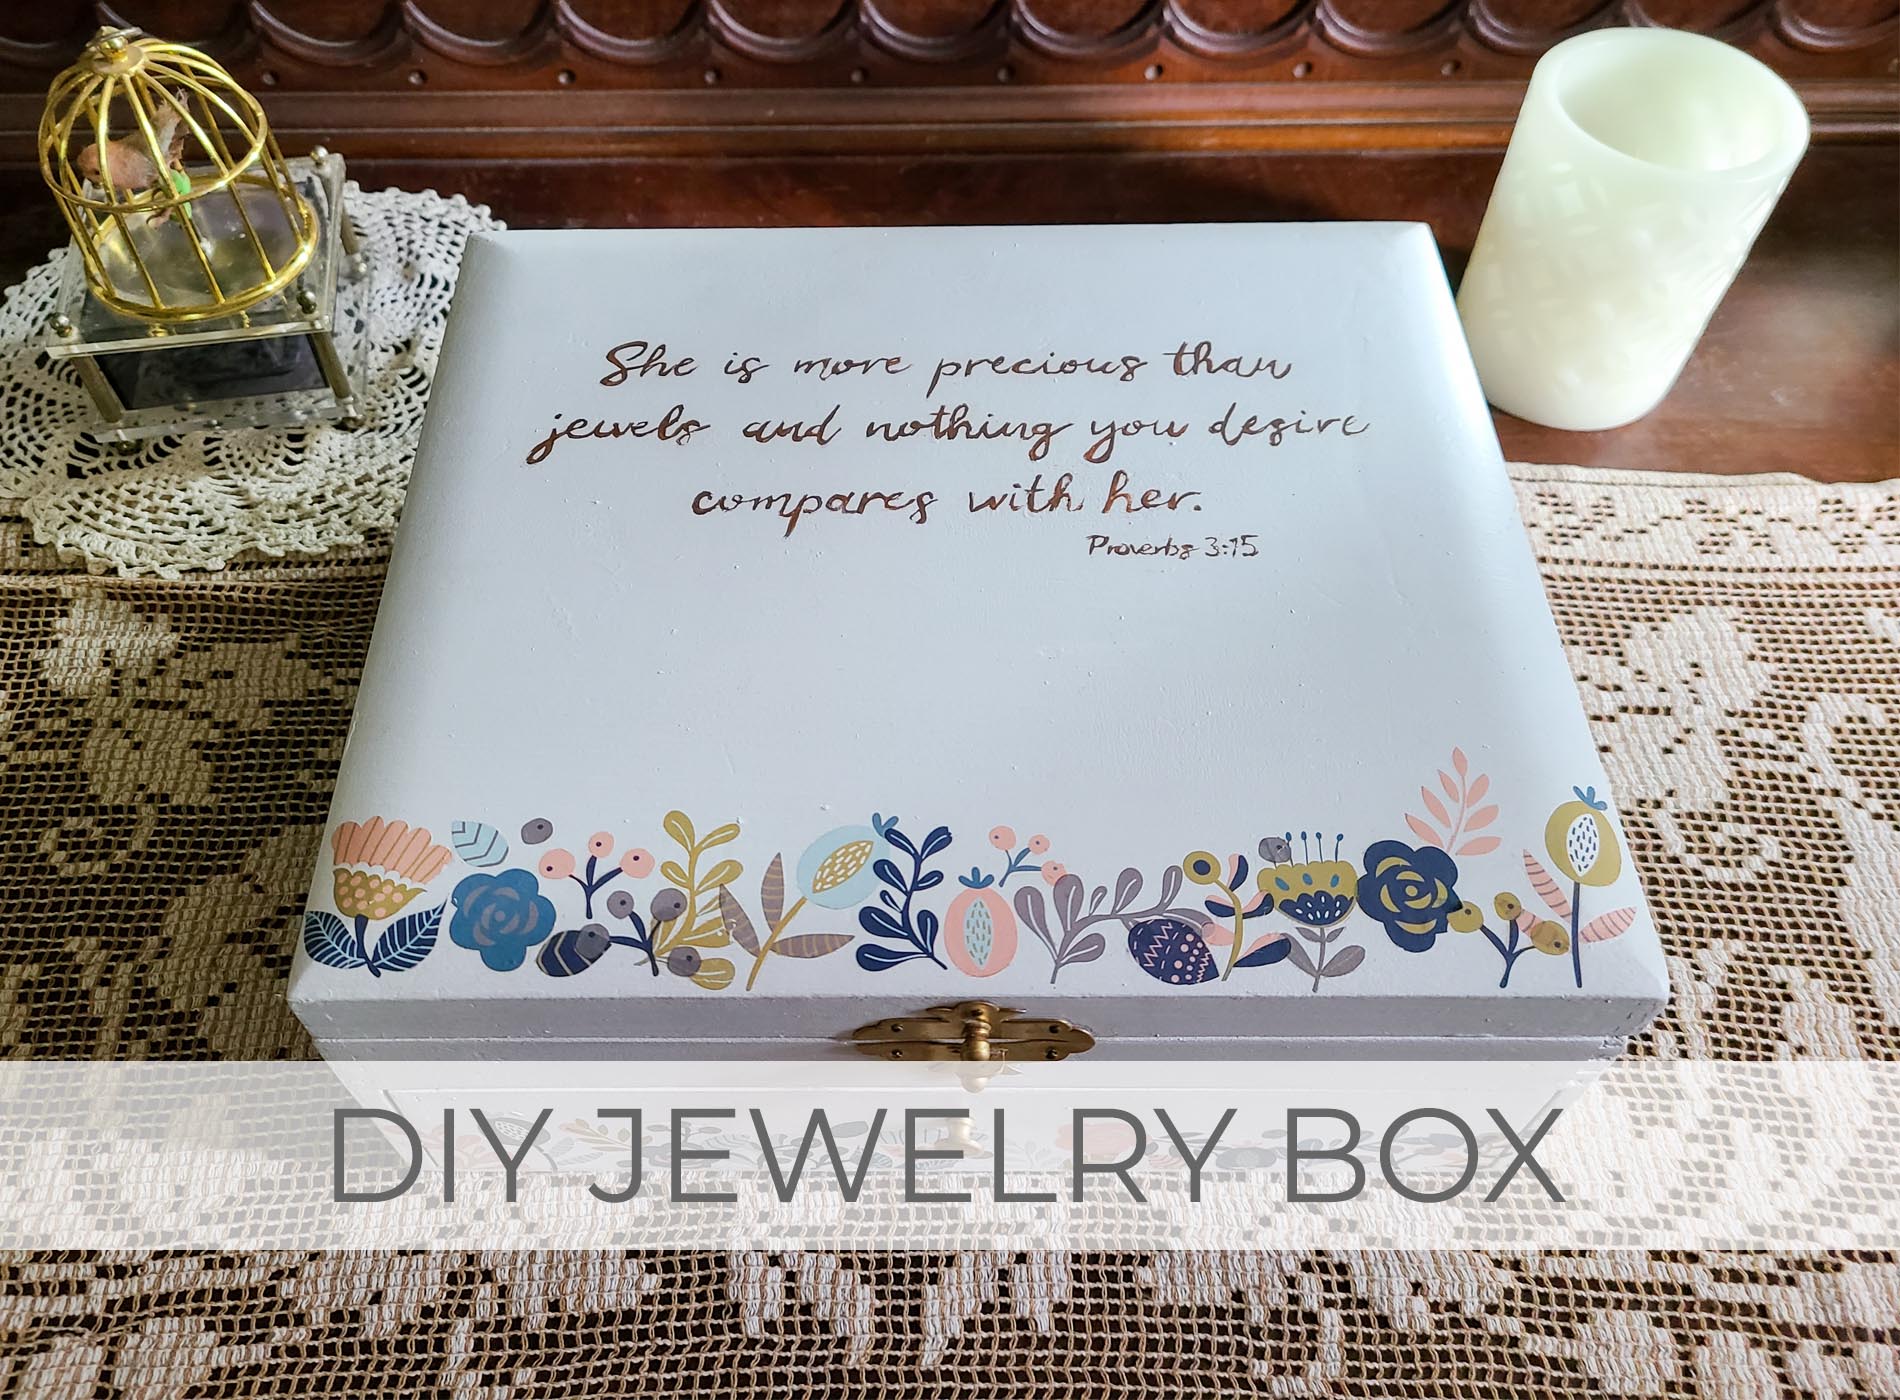 DIY Jewelry Box from Repurposed Silverware Chest by Larissa of Prodigal Pieces | prodigalpieces.com #prodigalpieces